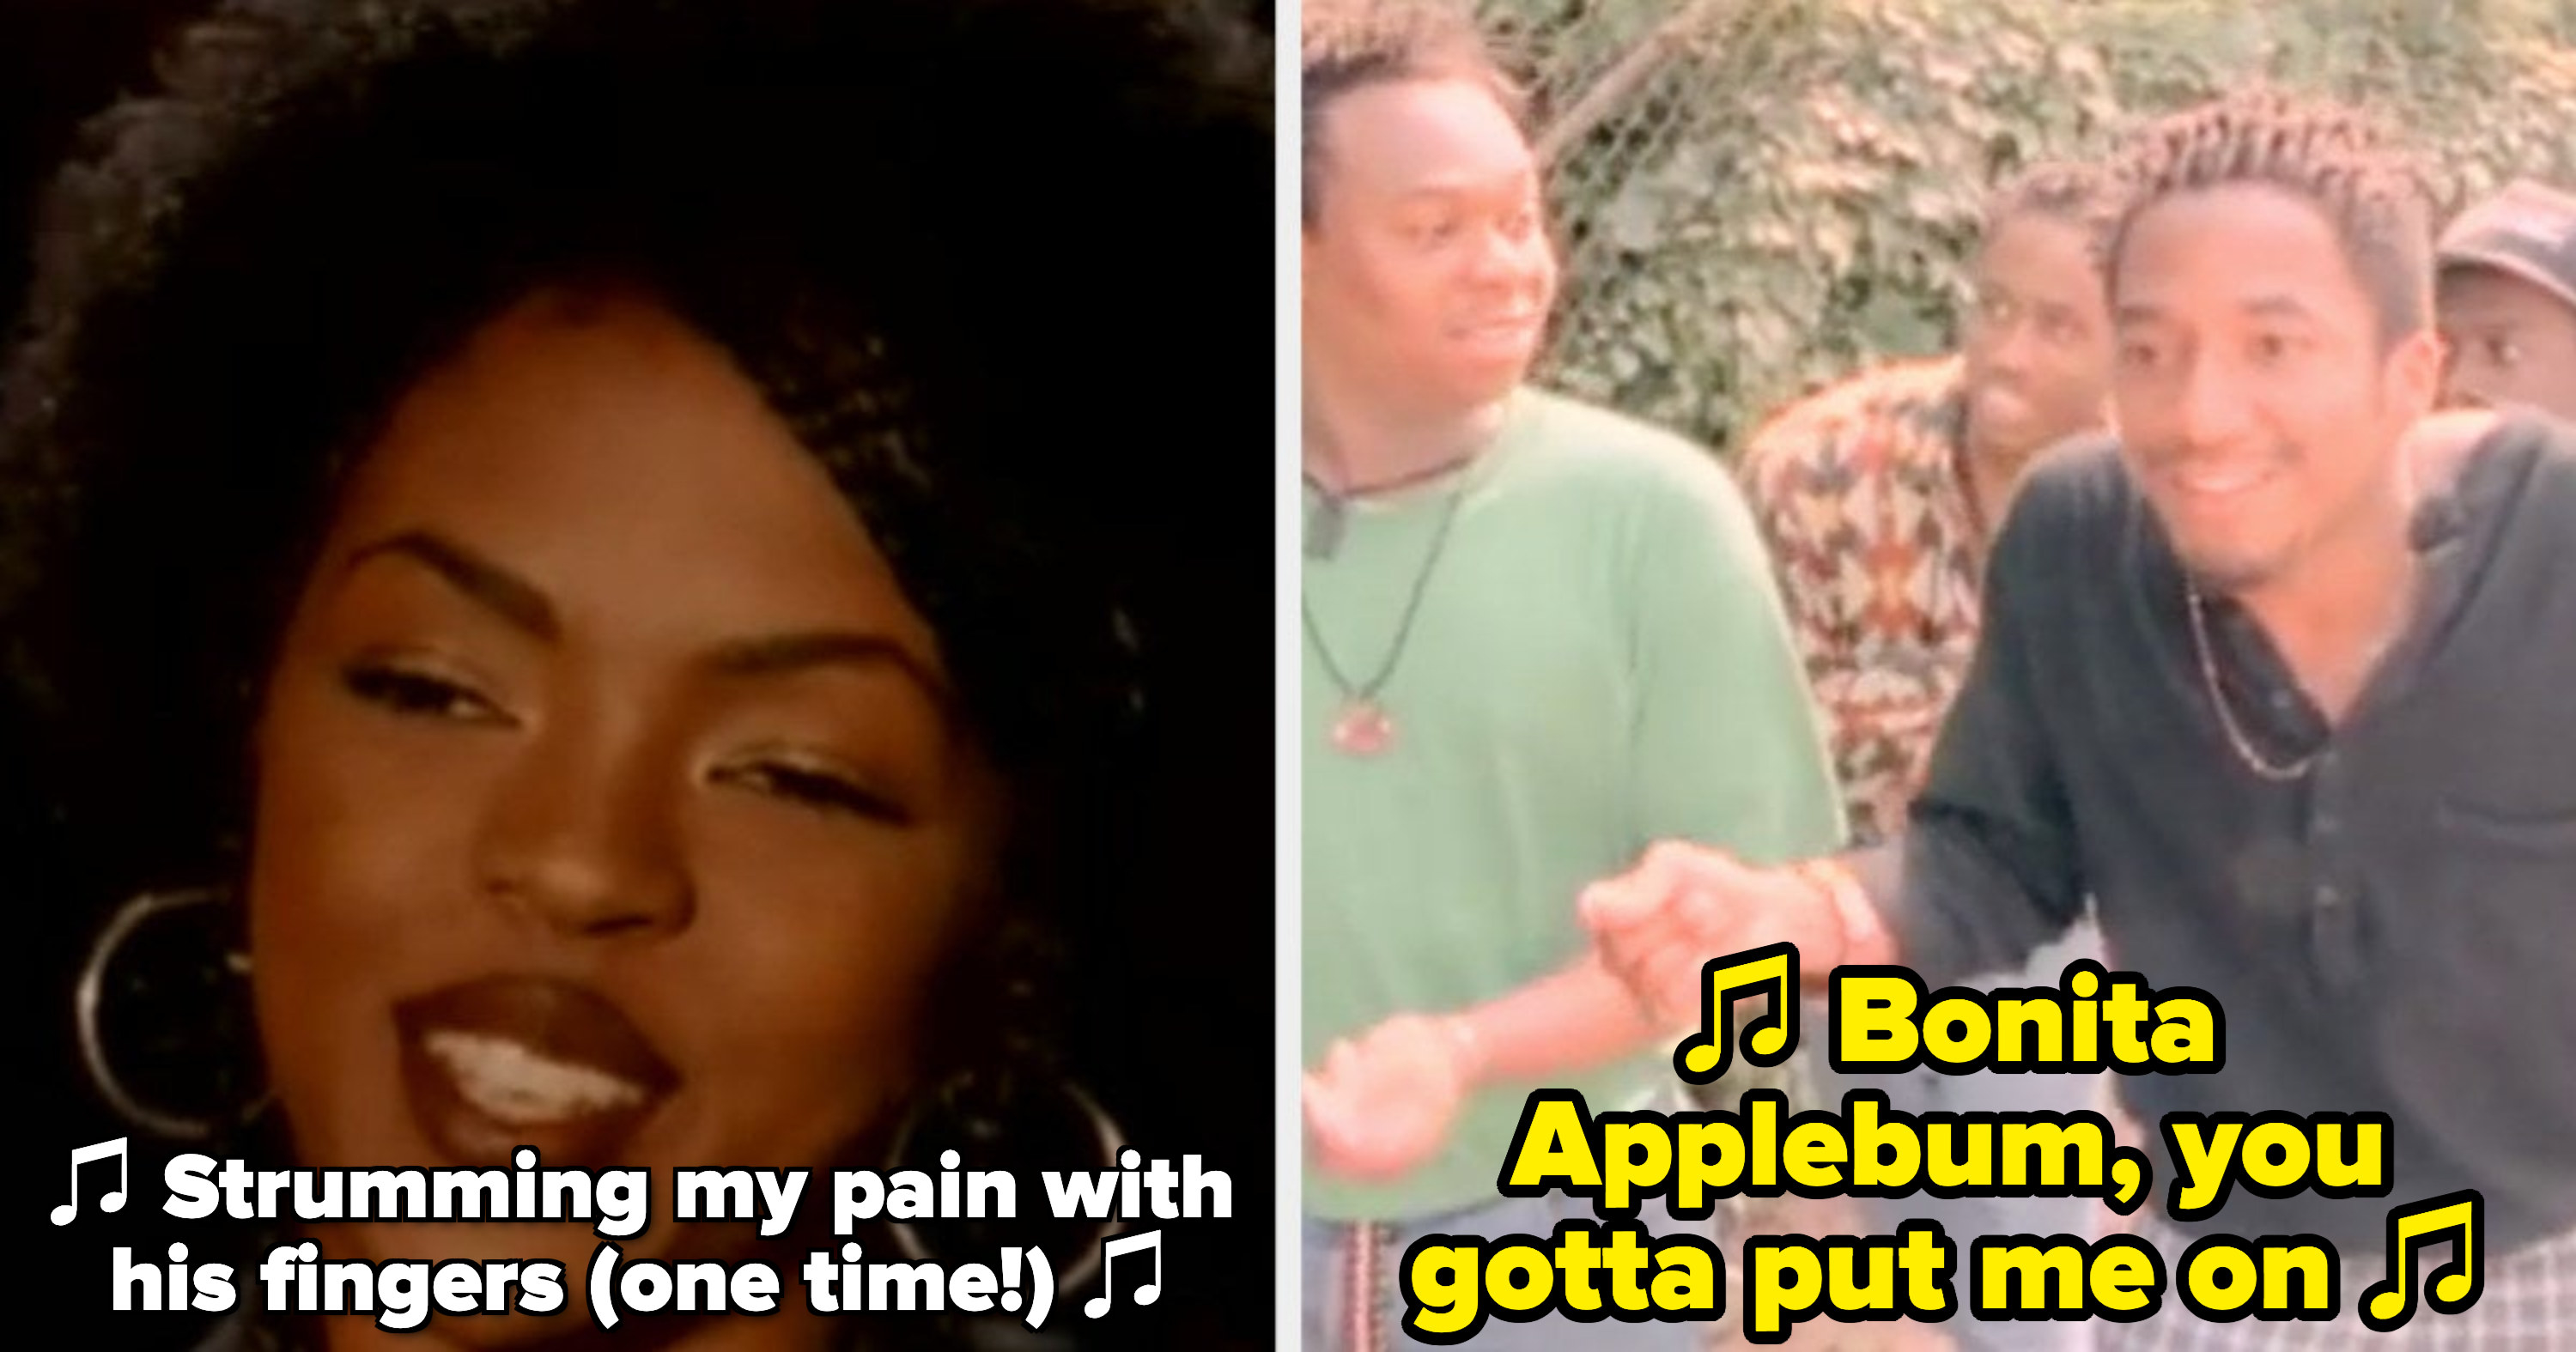 Lauryn Hill singing: &quot;Strumming my pain with his fingers;&quot; A Tribe Called Quest rapping: &quot;Bonita Applebum, you gotta put me on&quot;